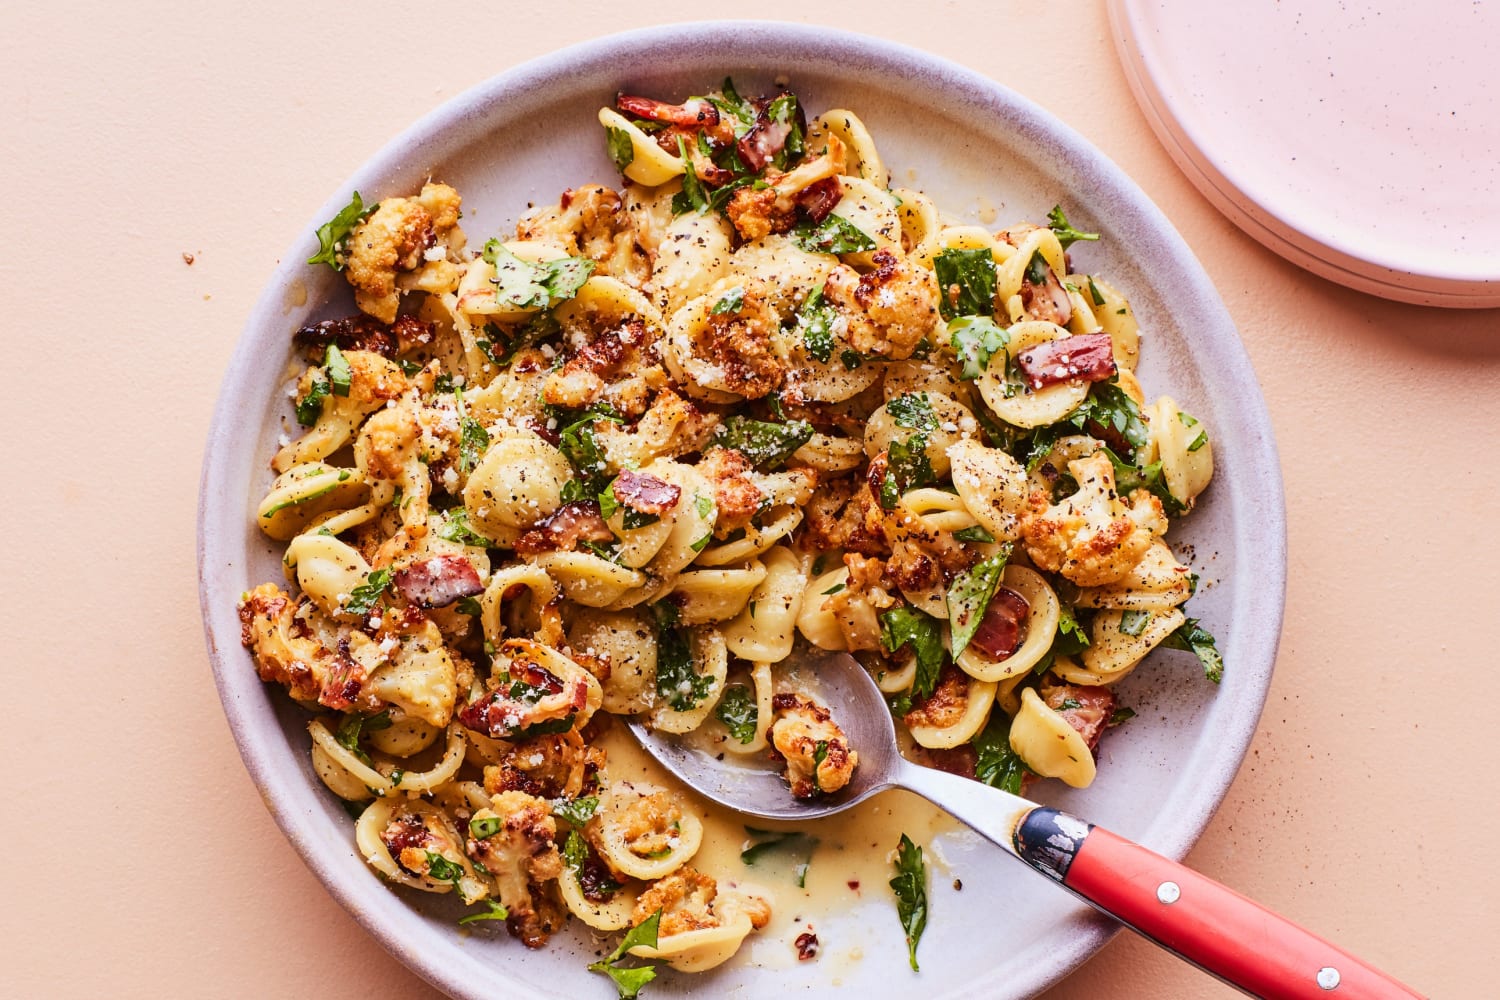 71 Recipes That Prove Pasta Is a Love Language